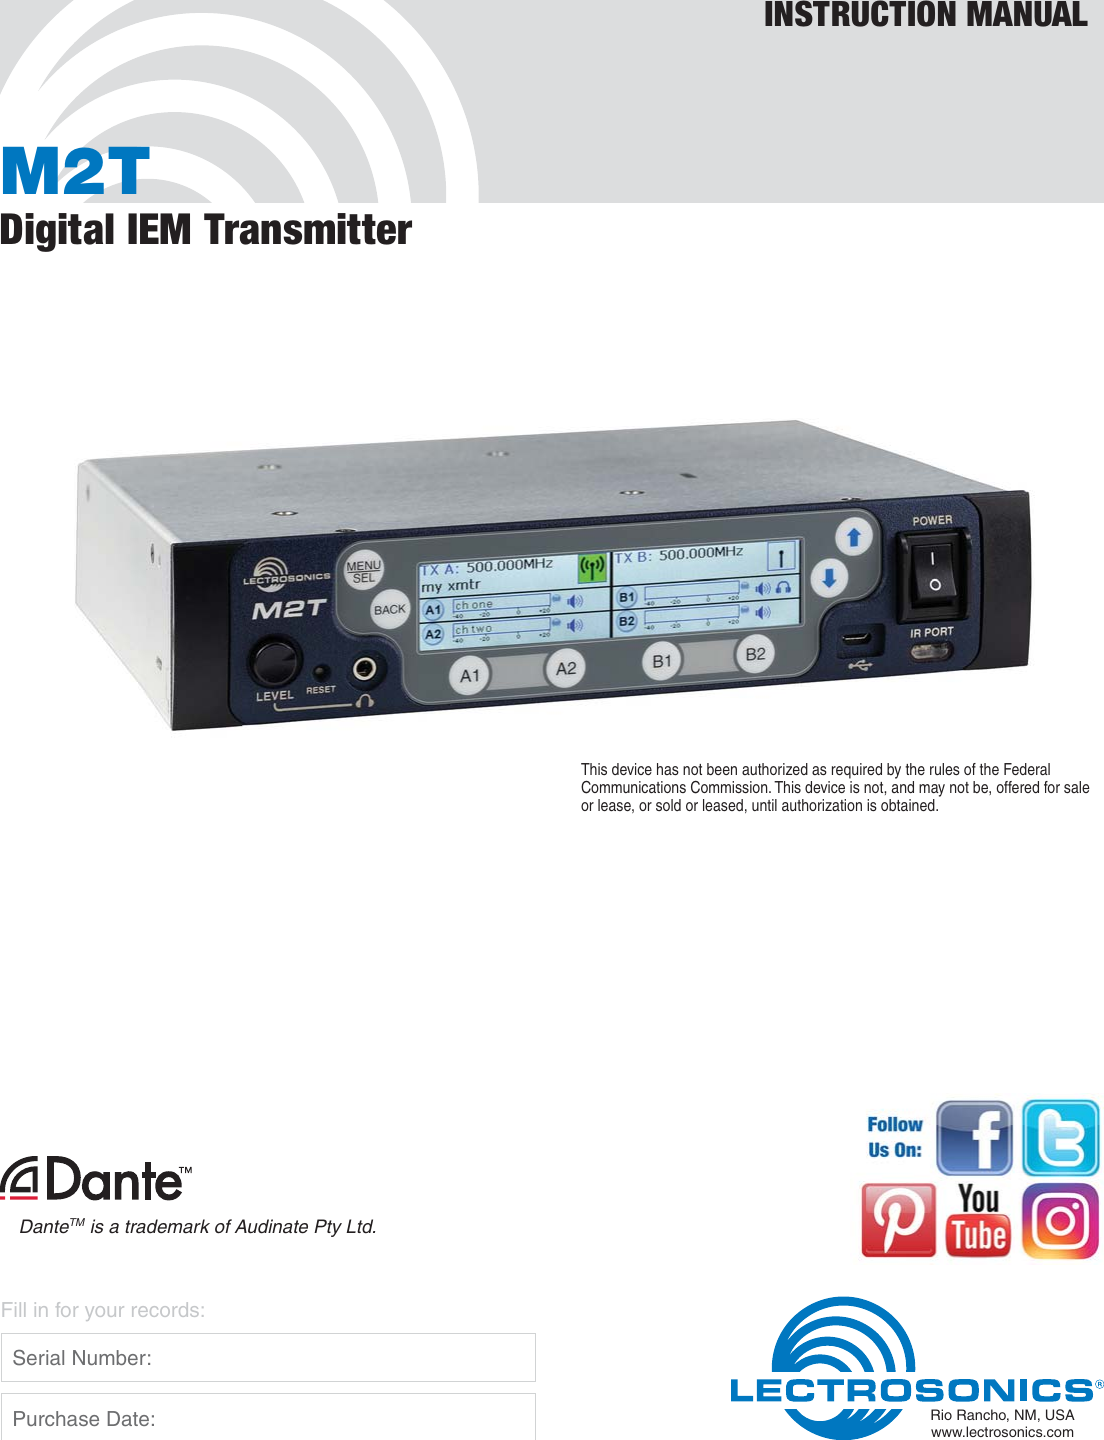 M2TDigital IEM TransmitterINSTRUCTION MANUALRio Rancho, NM, USAwww.lectrosonics.comFill in for your records:  Serial Number:  Purchase Date:This device has not been authorized as required by the rules of the Federal Communications Commission. This device is not, and may not be, offered for sale or lease, or sold or leased, until authorization is obtained.DanteTM is a trademark of Audinate Pty Ltd.